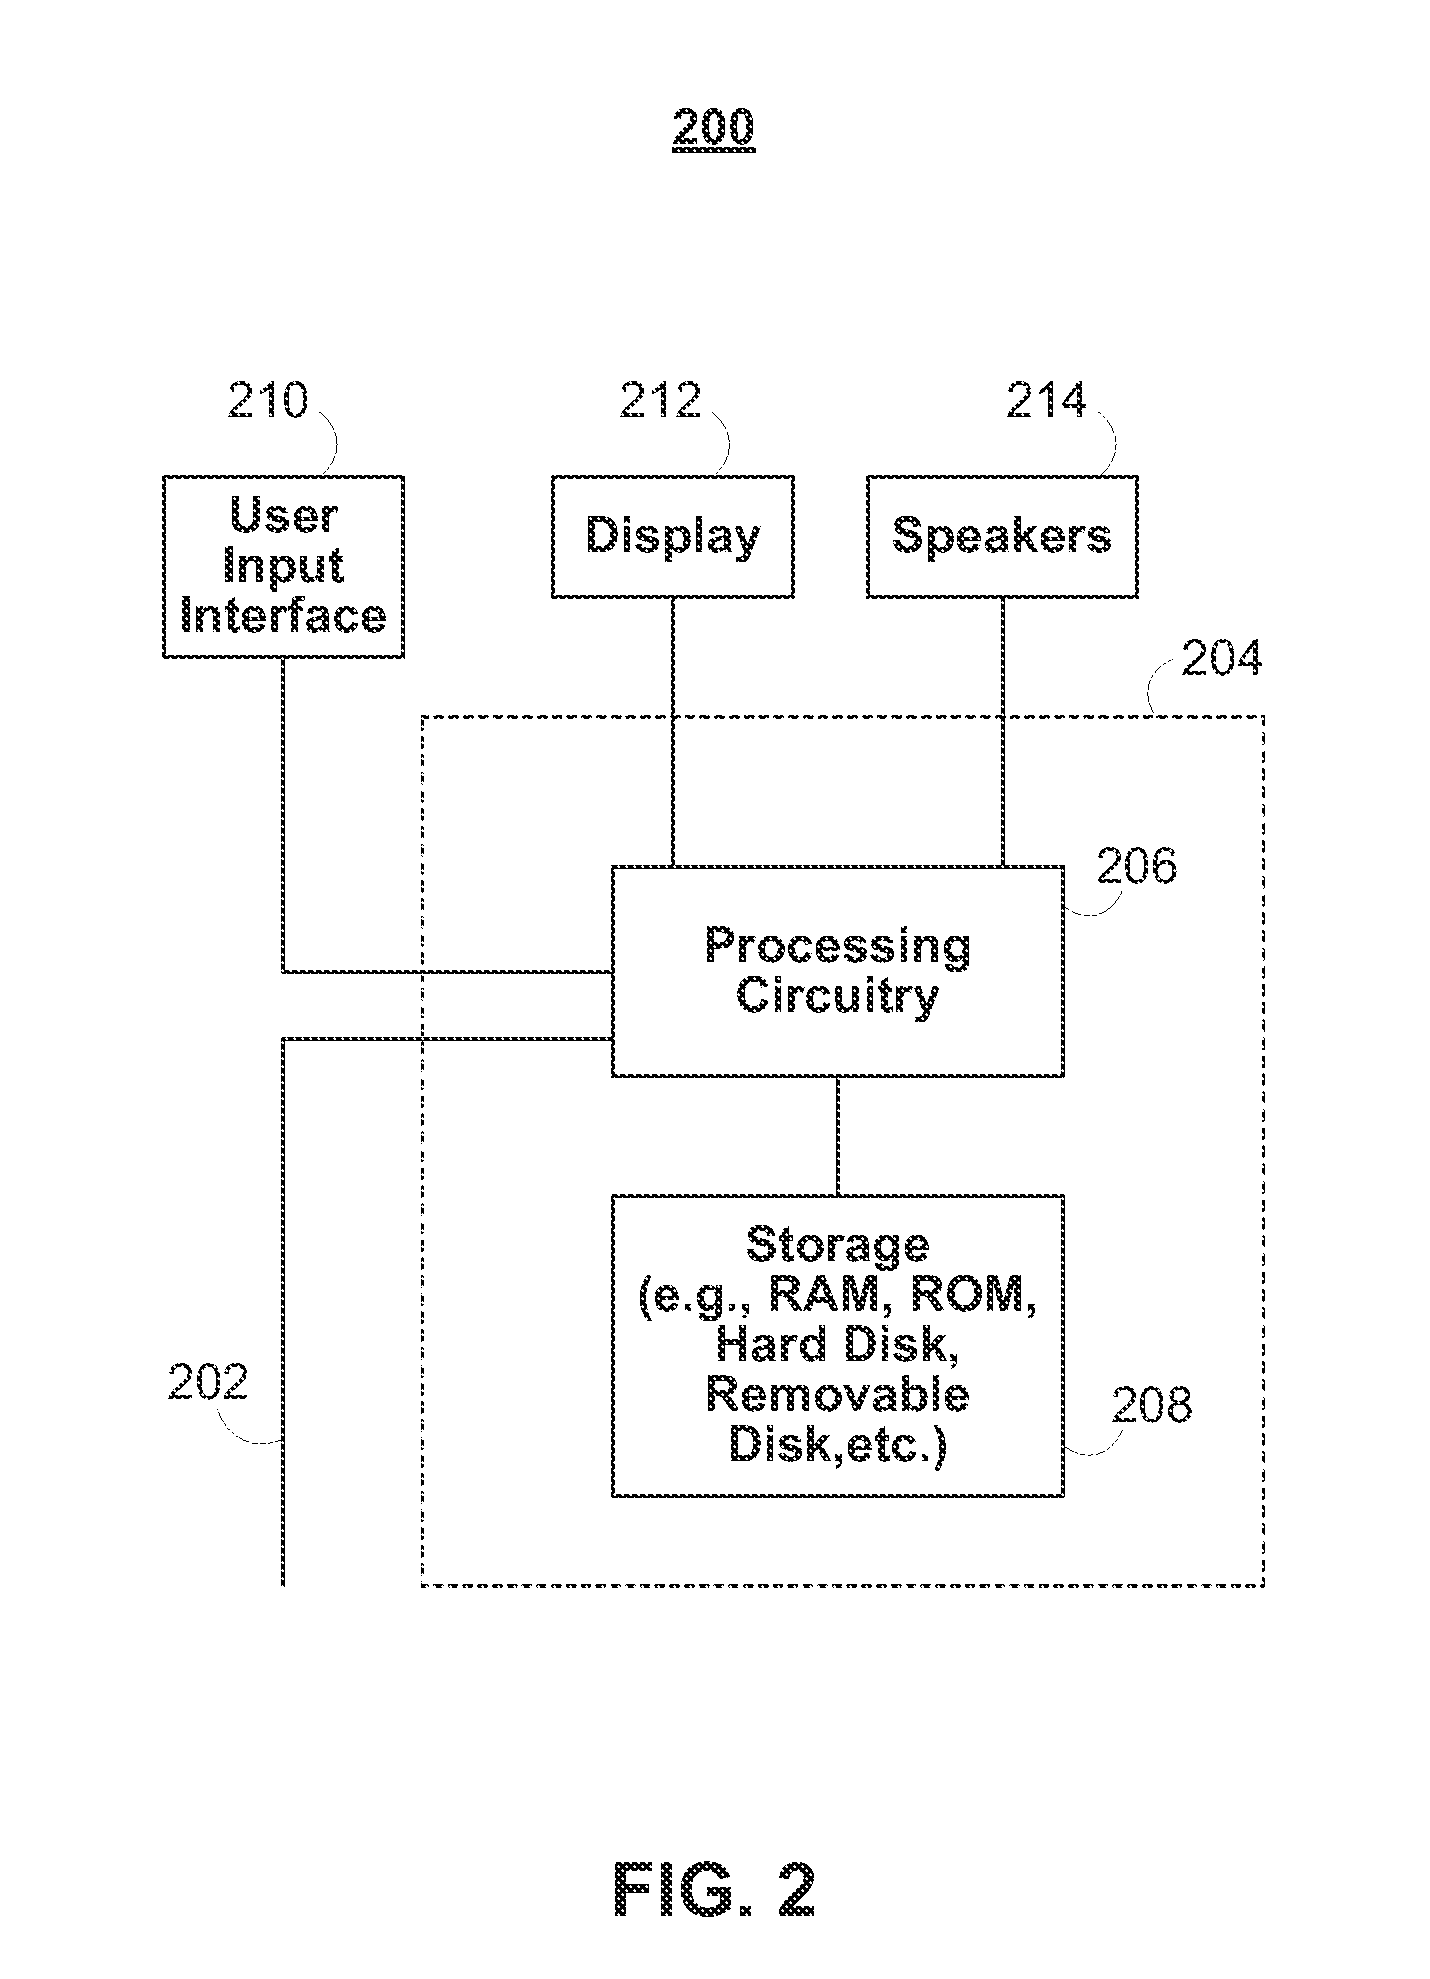 Systems and methods for selectively modifying the display of advertisements and providing supplementary media content